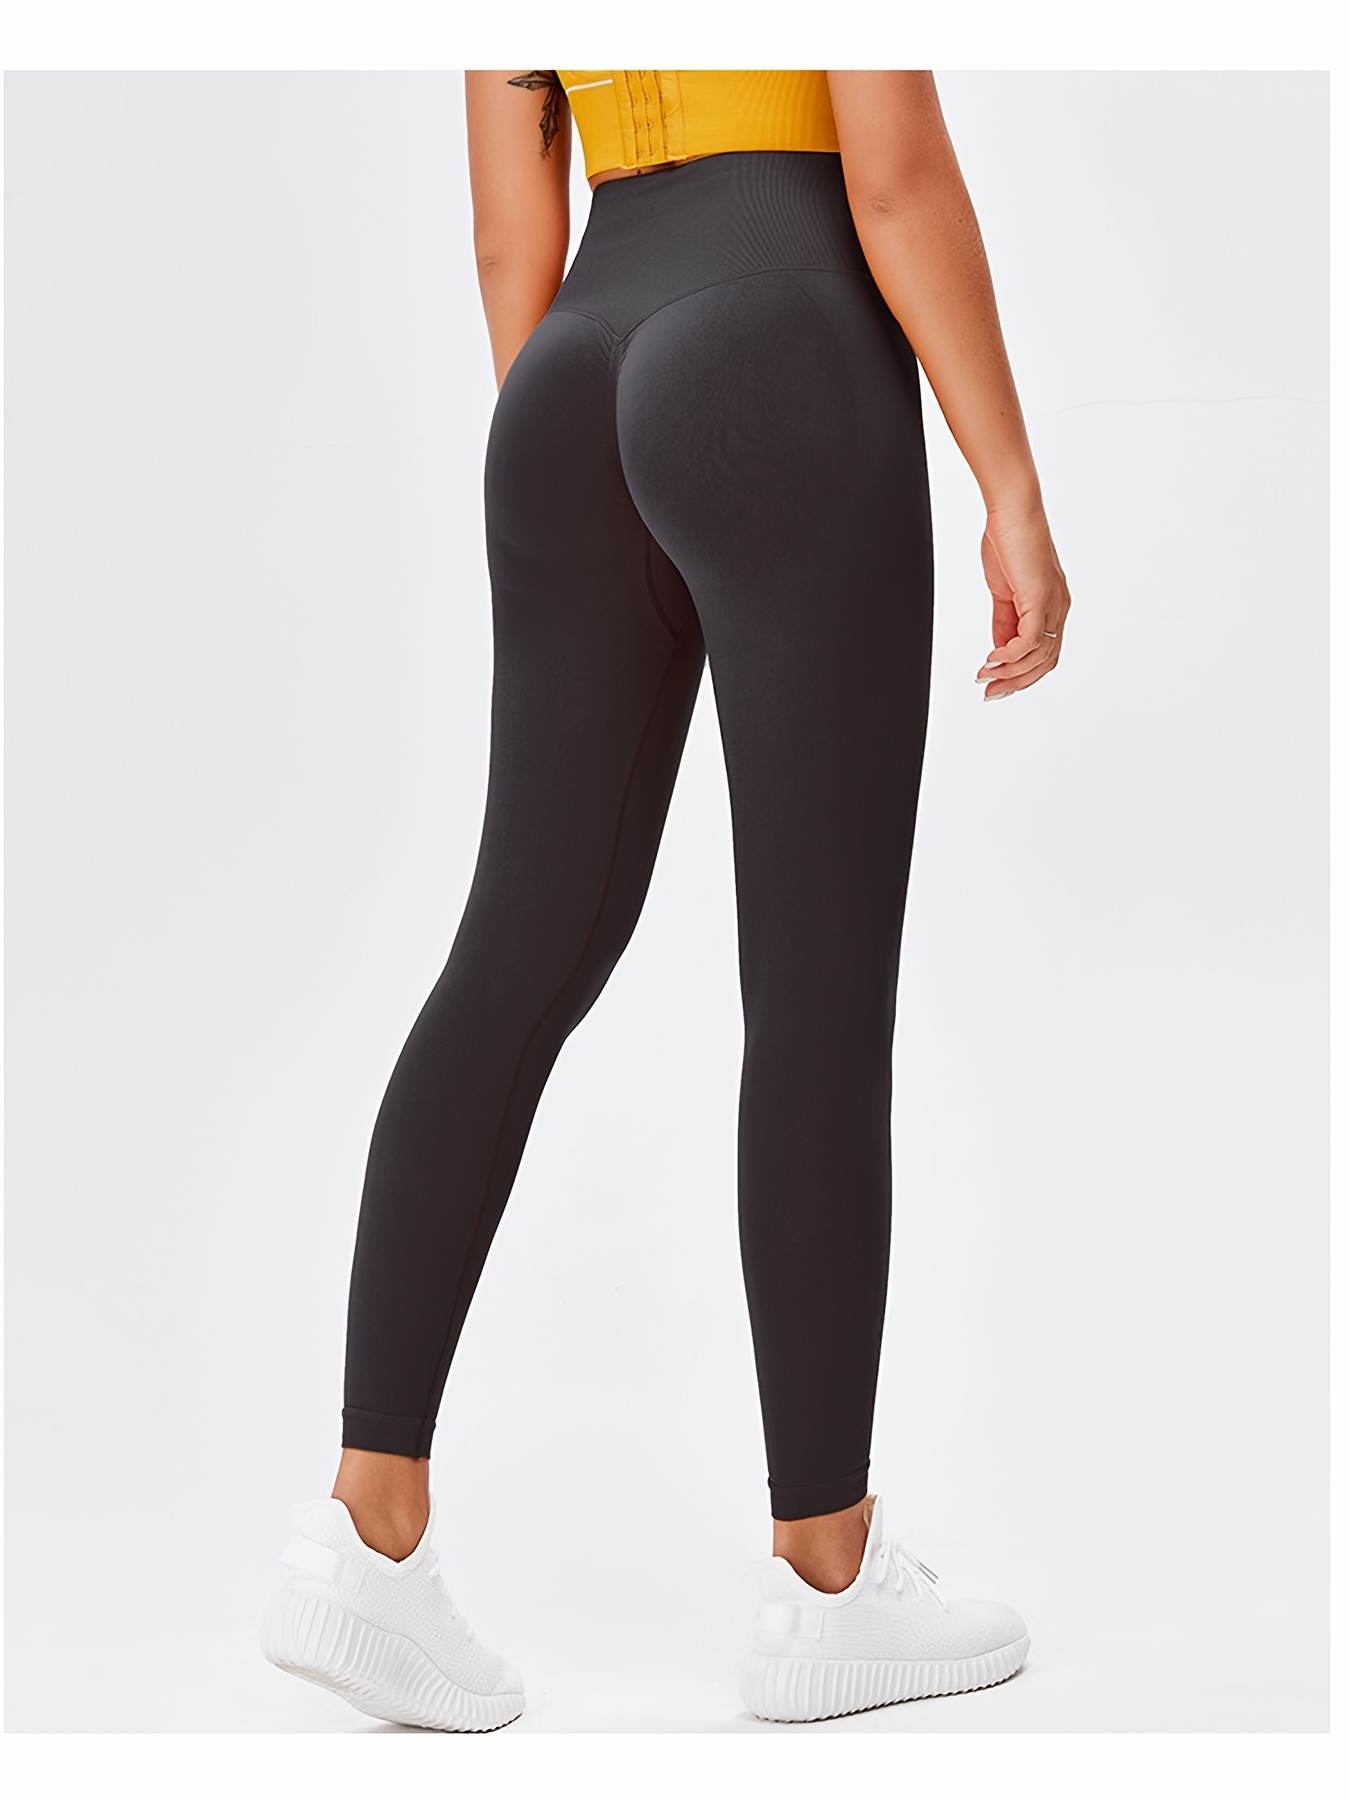 Fengqque Women's Quick-Drying Yoga Clothes Fitness Tights Yoga